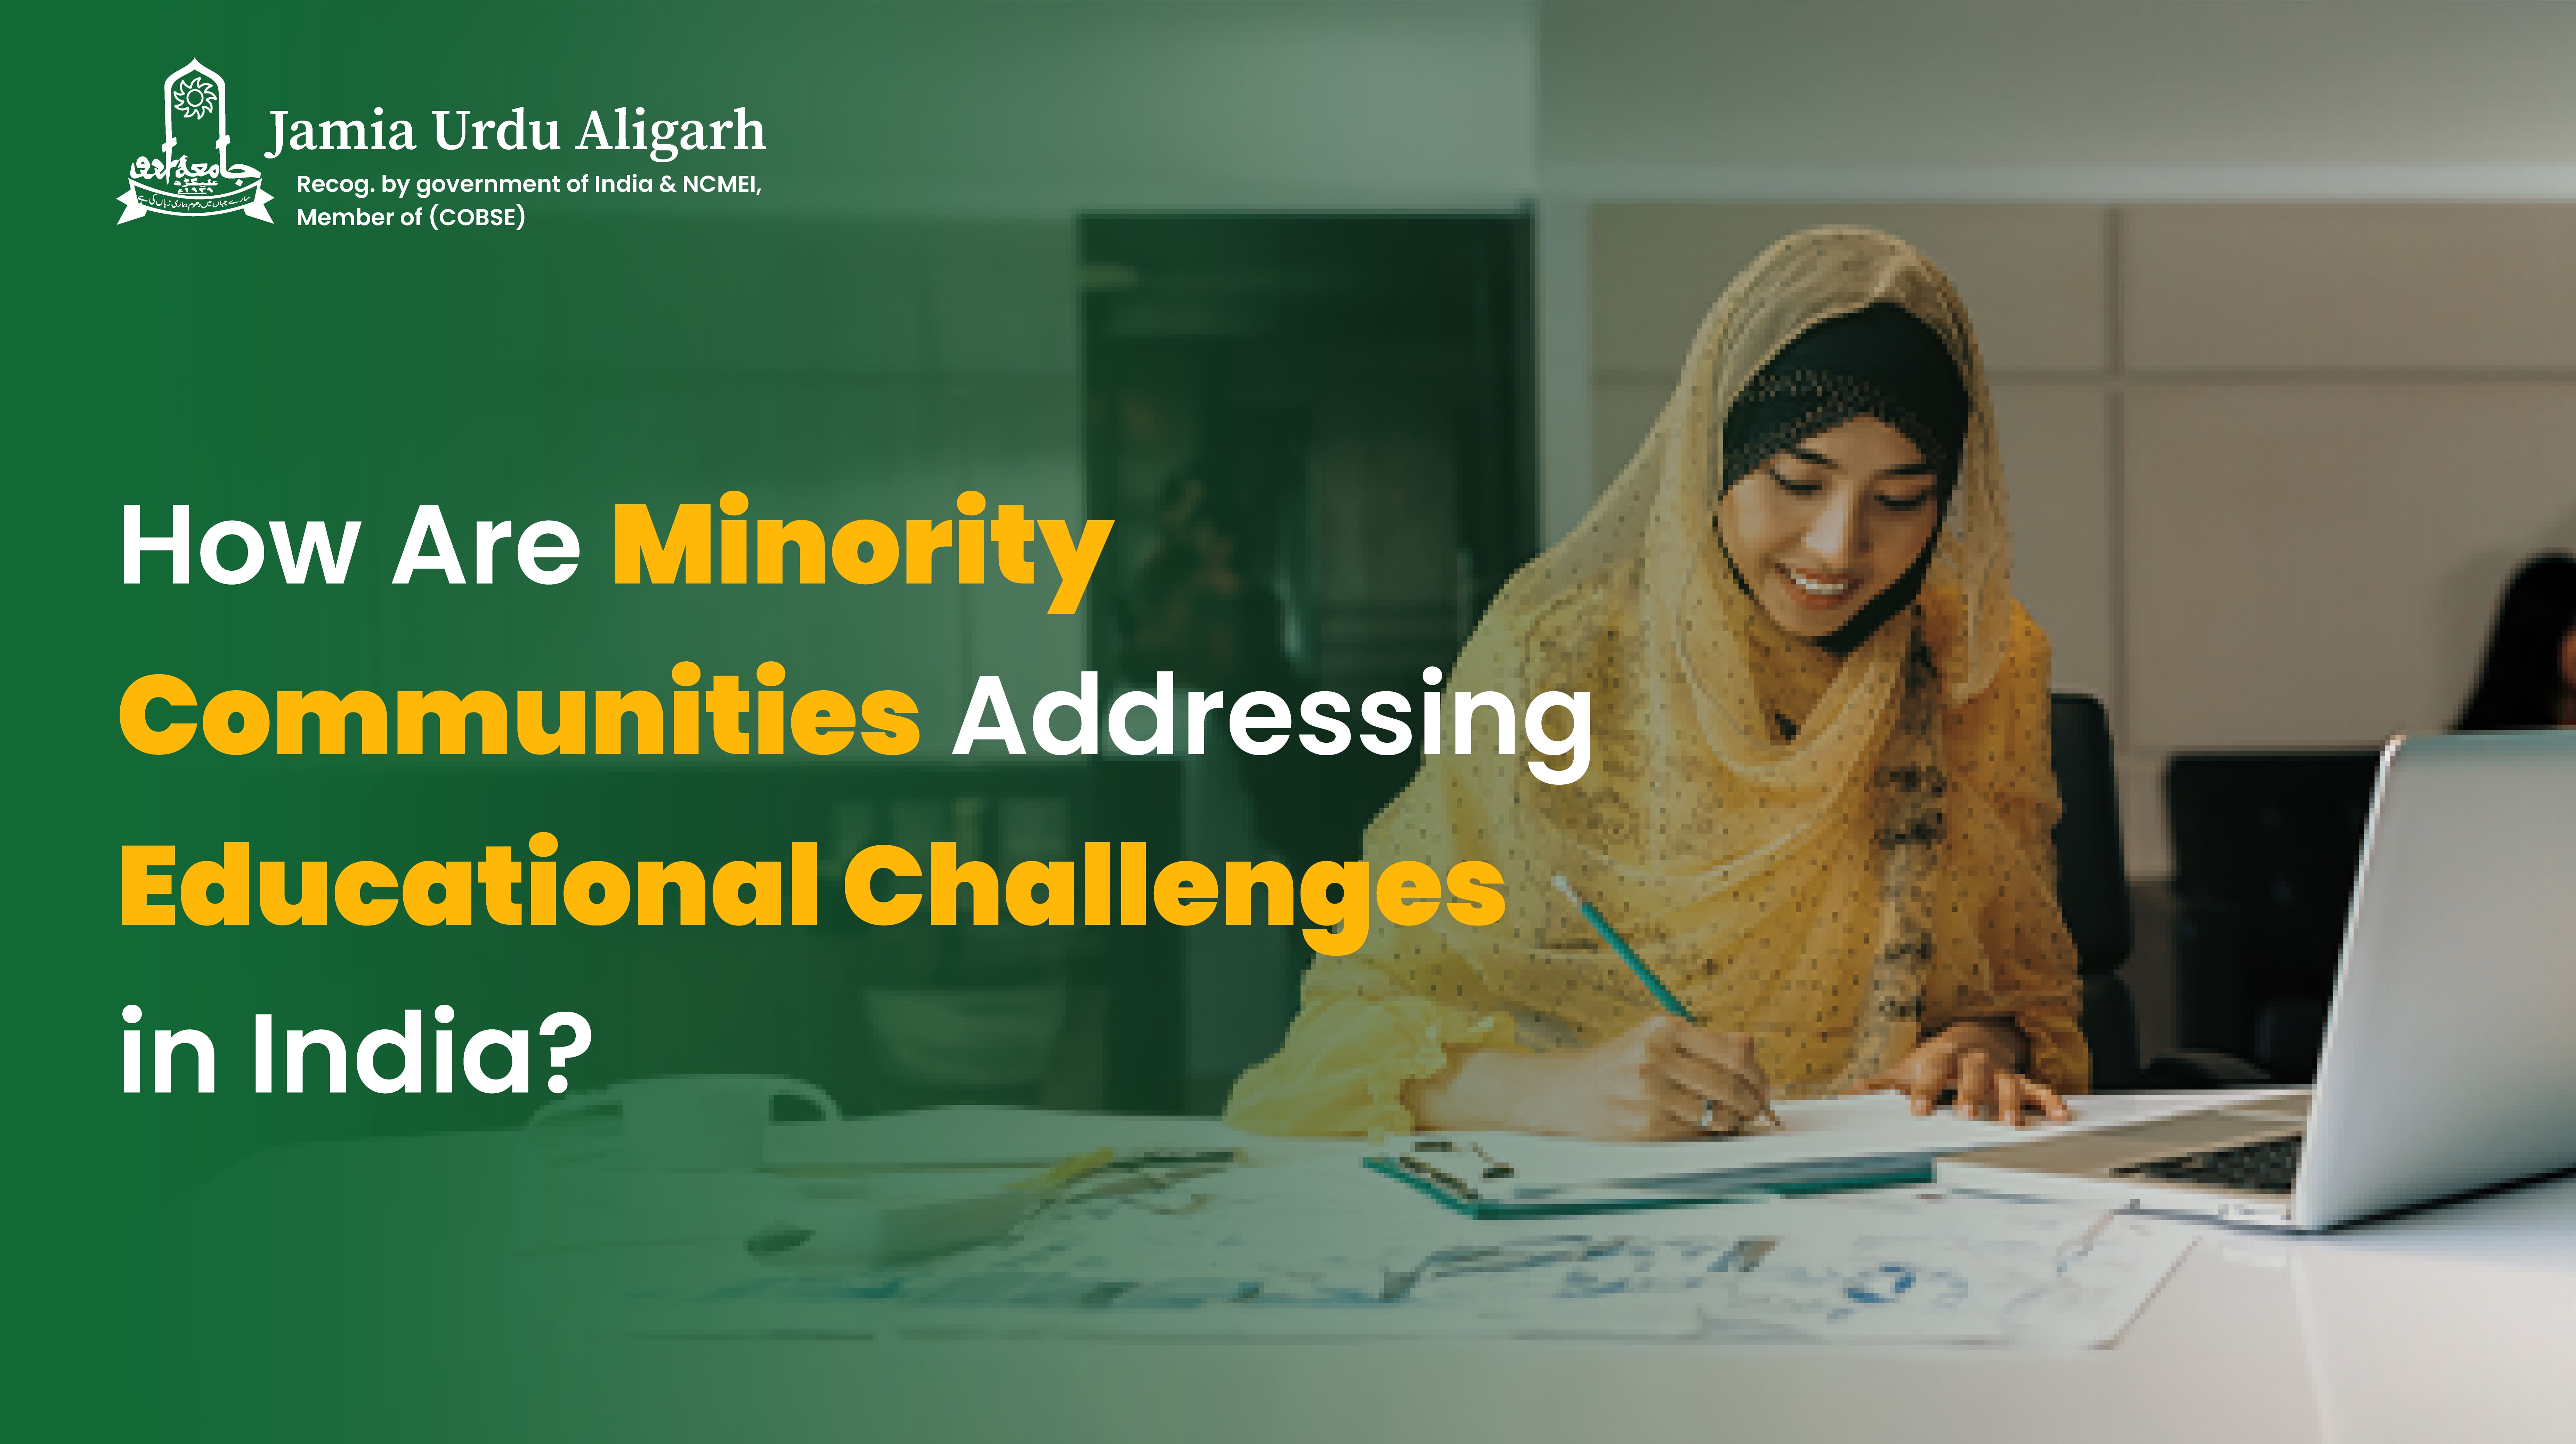 How Are Minority Communities Addressing Educational Challenges in India?